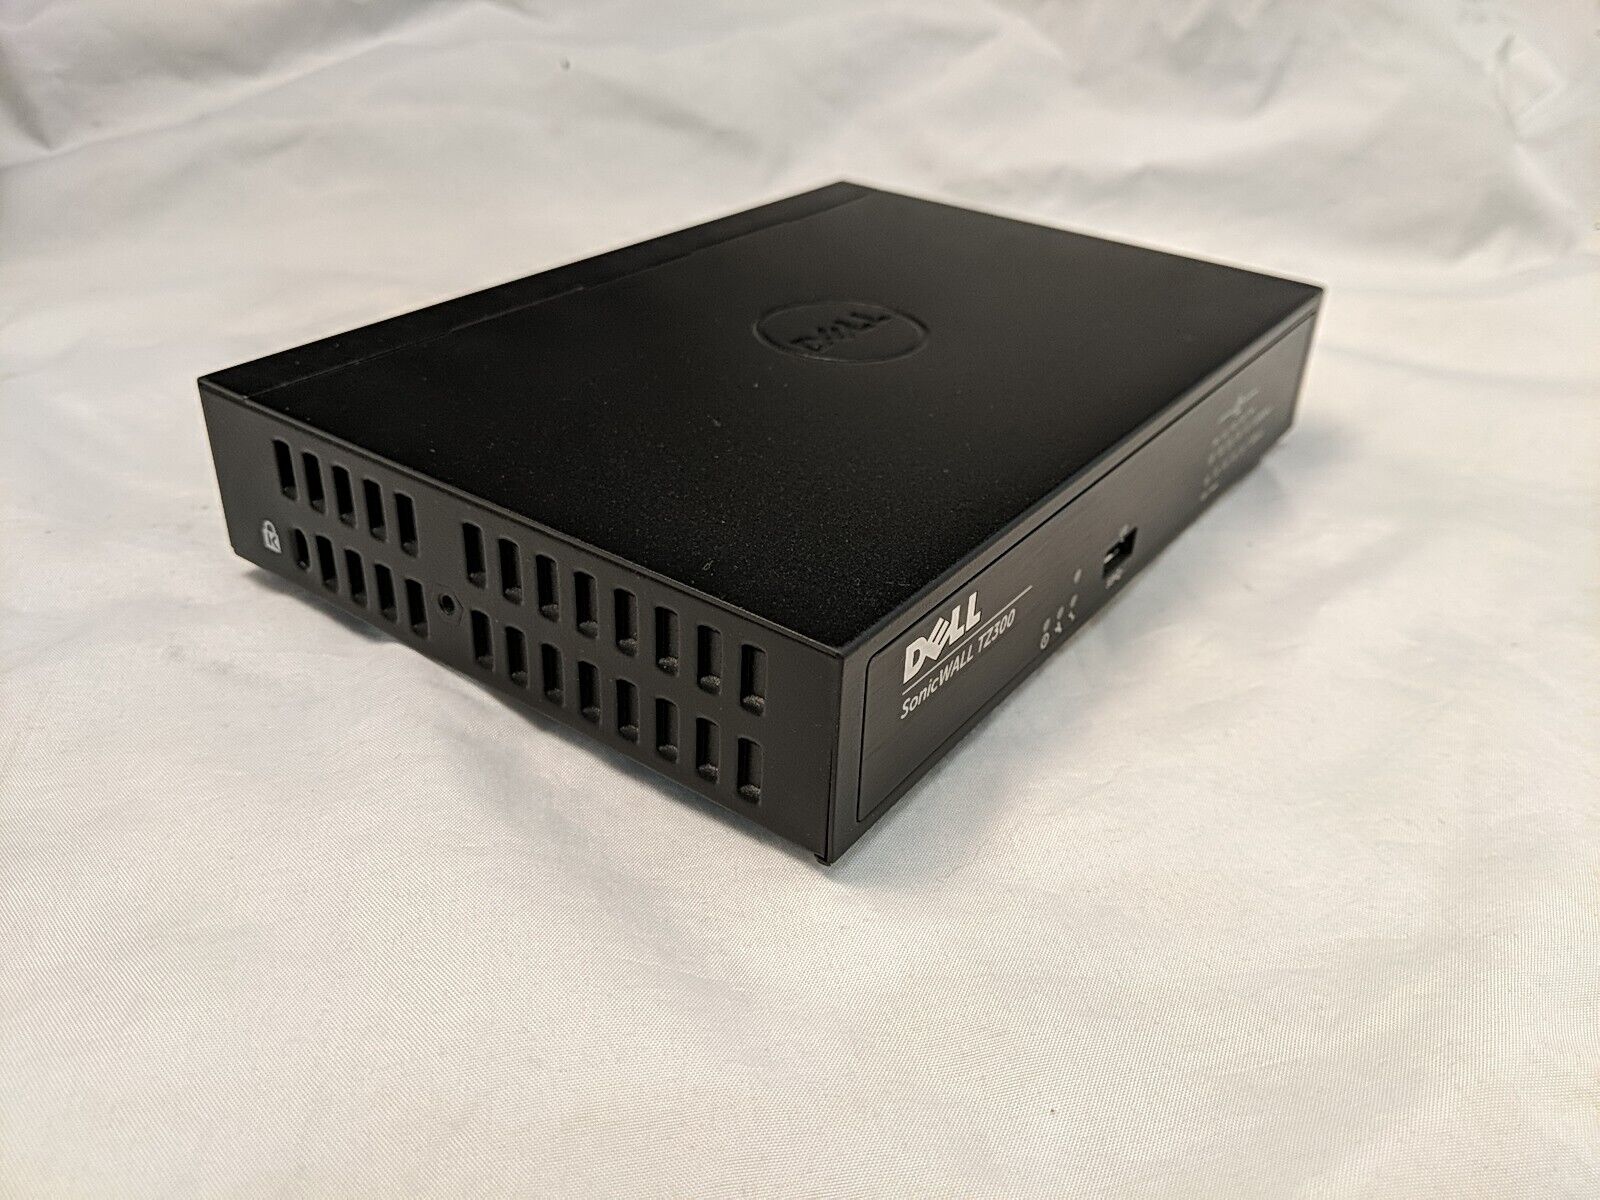 Dell SonicWall TZ300 5 Port Network Security Firewall Appliance GB922